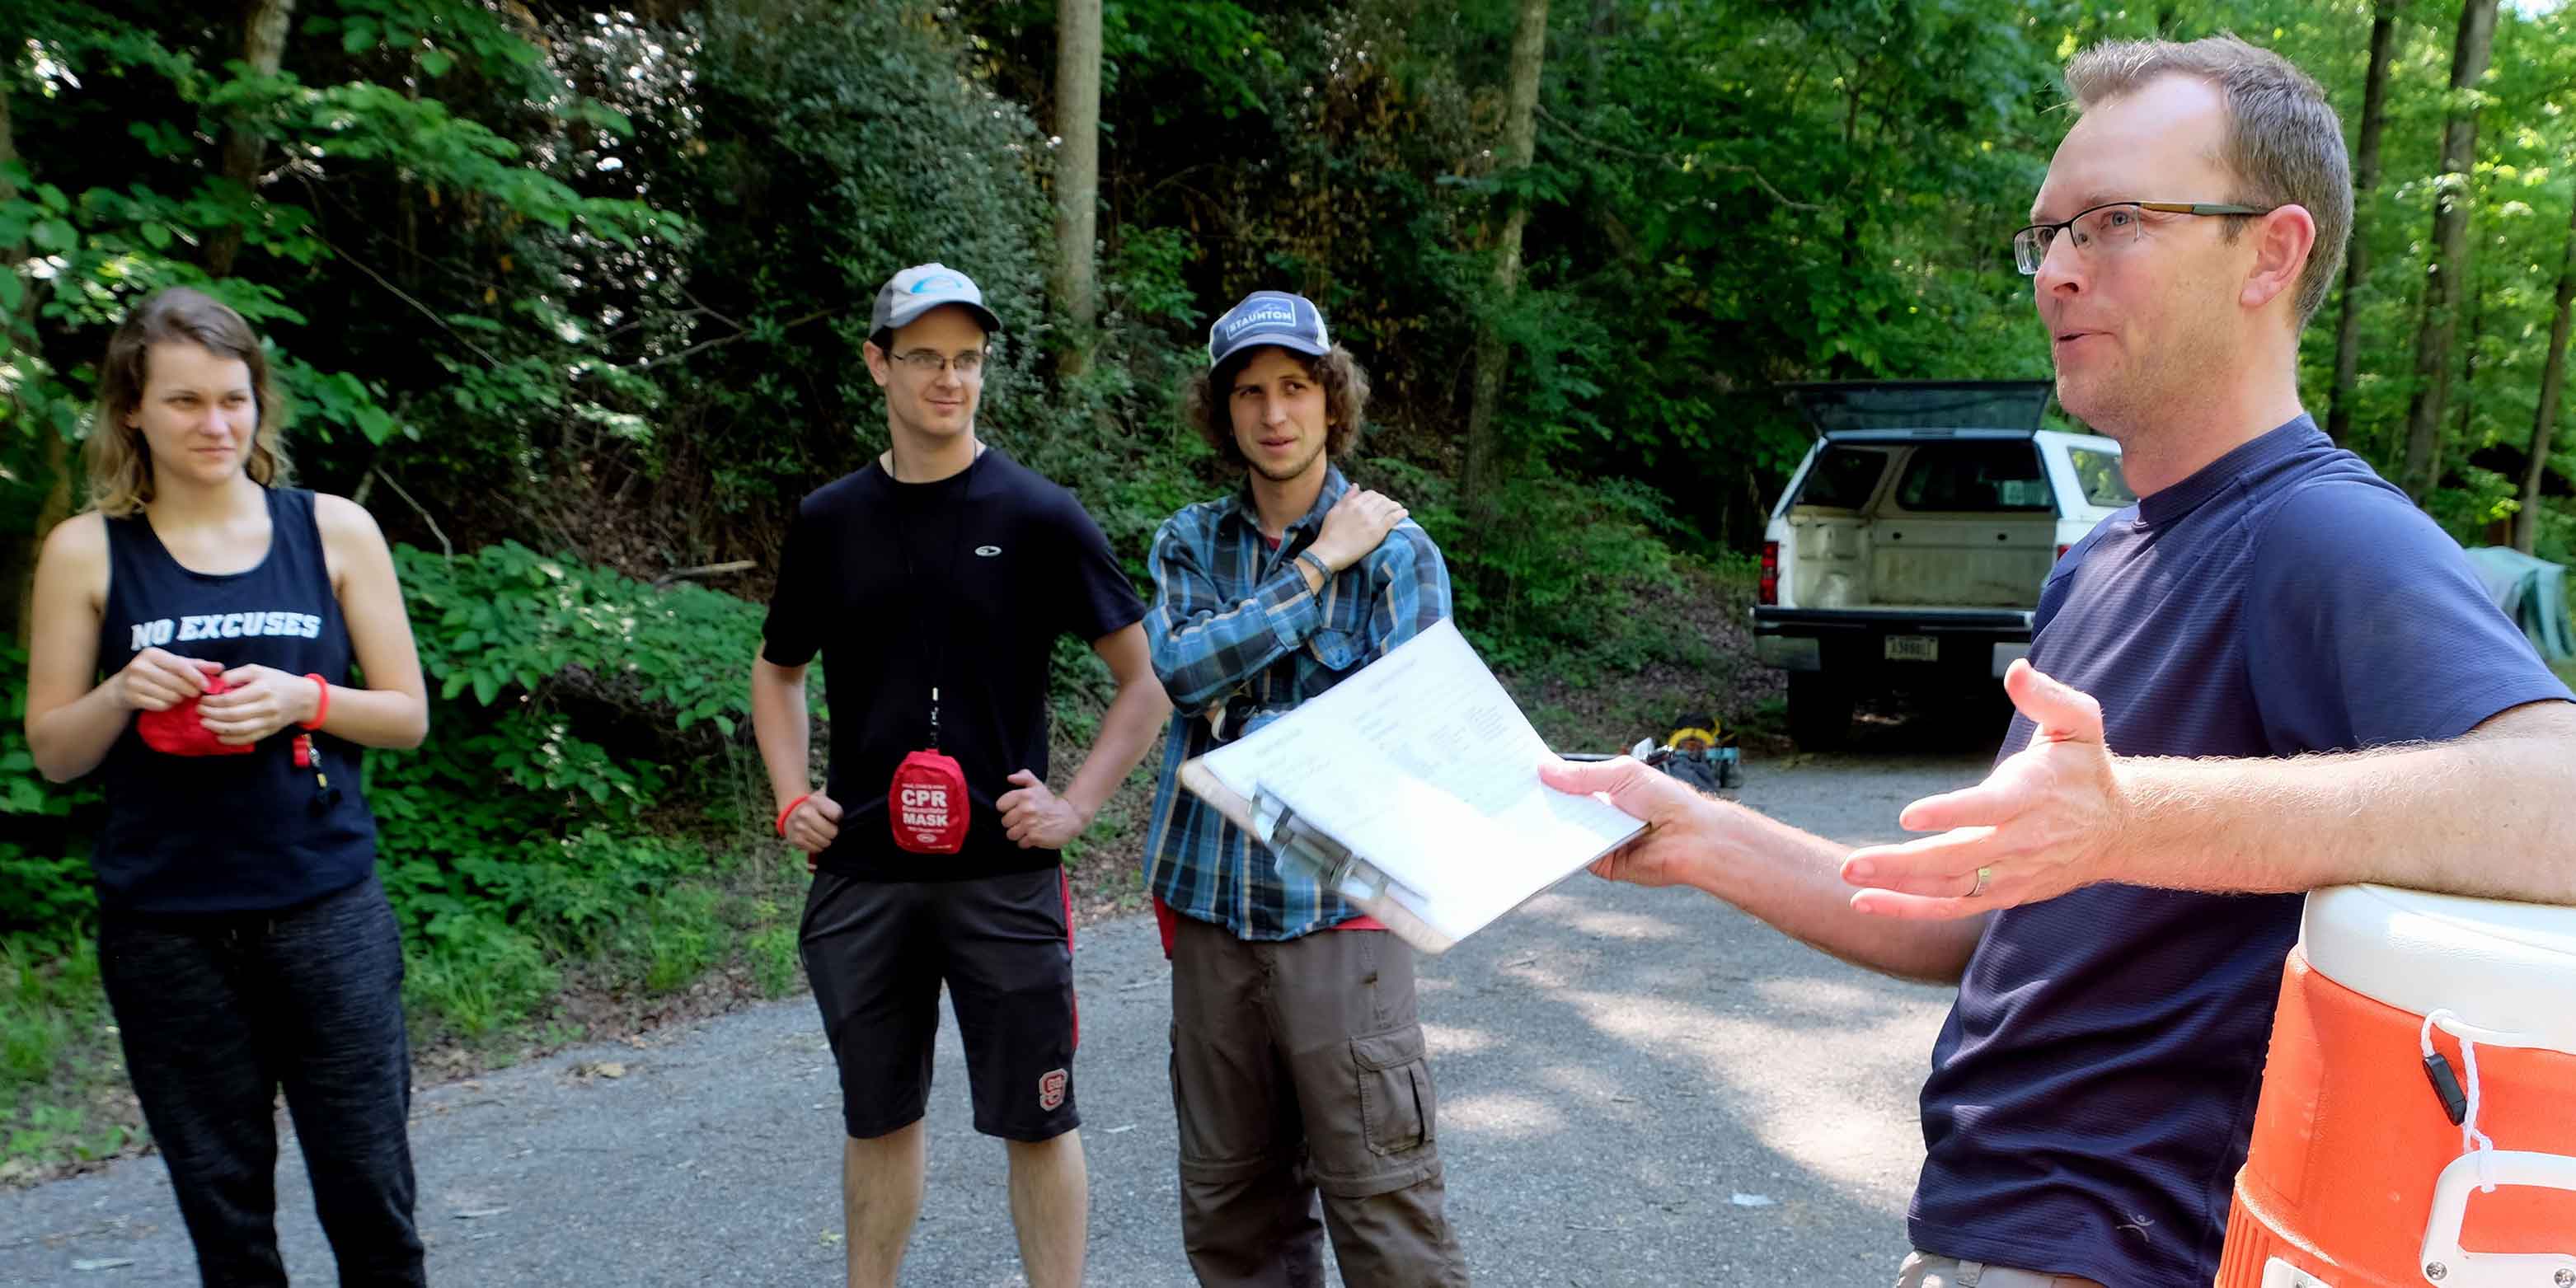 One woman and three men stand on a paved roadway in a forested area. One man holds a clipboard and addresses the other three.